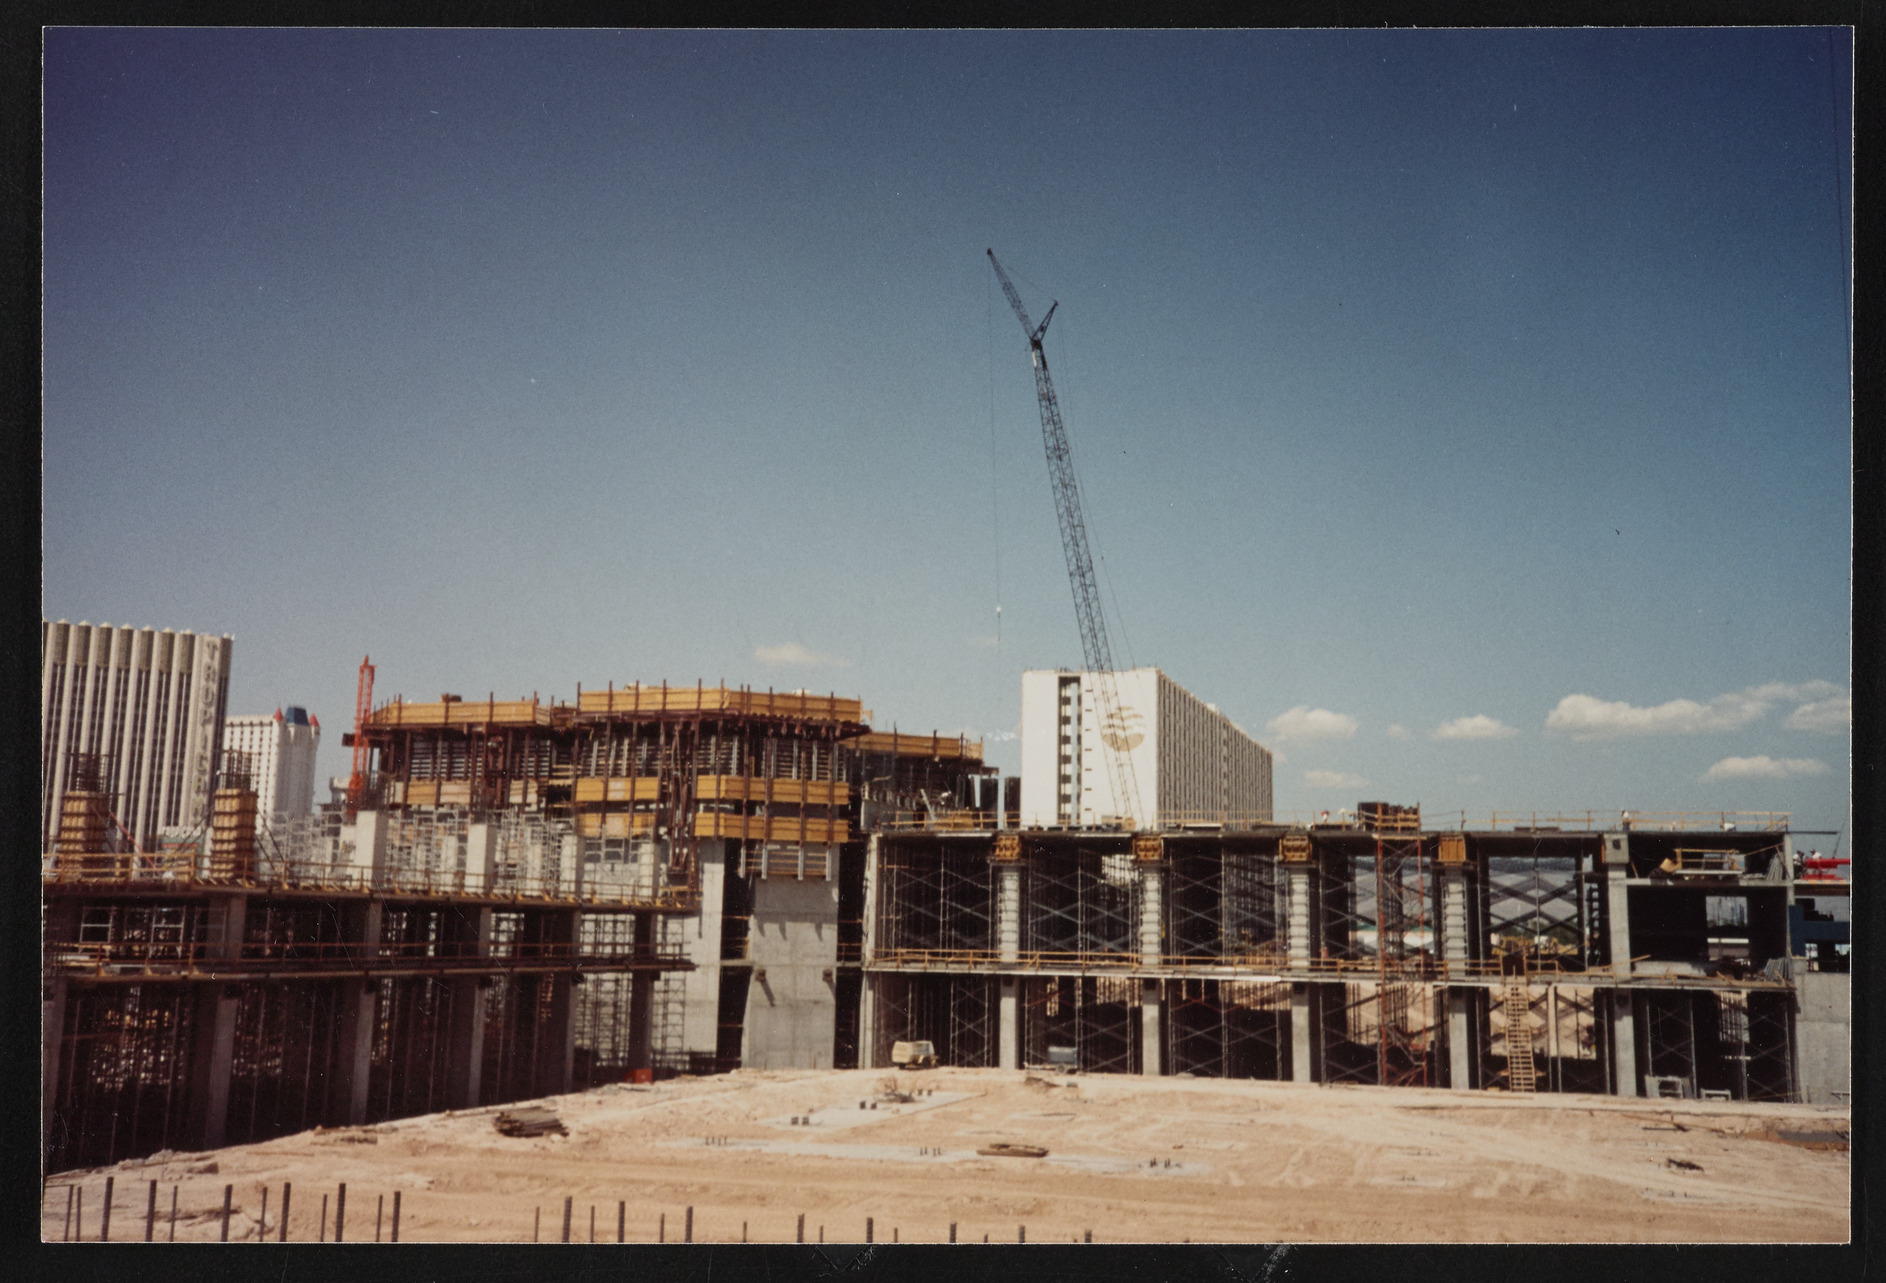 MGM construction party, image 27